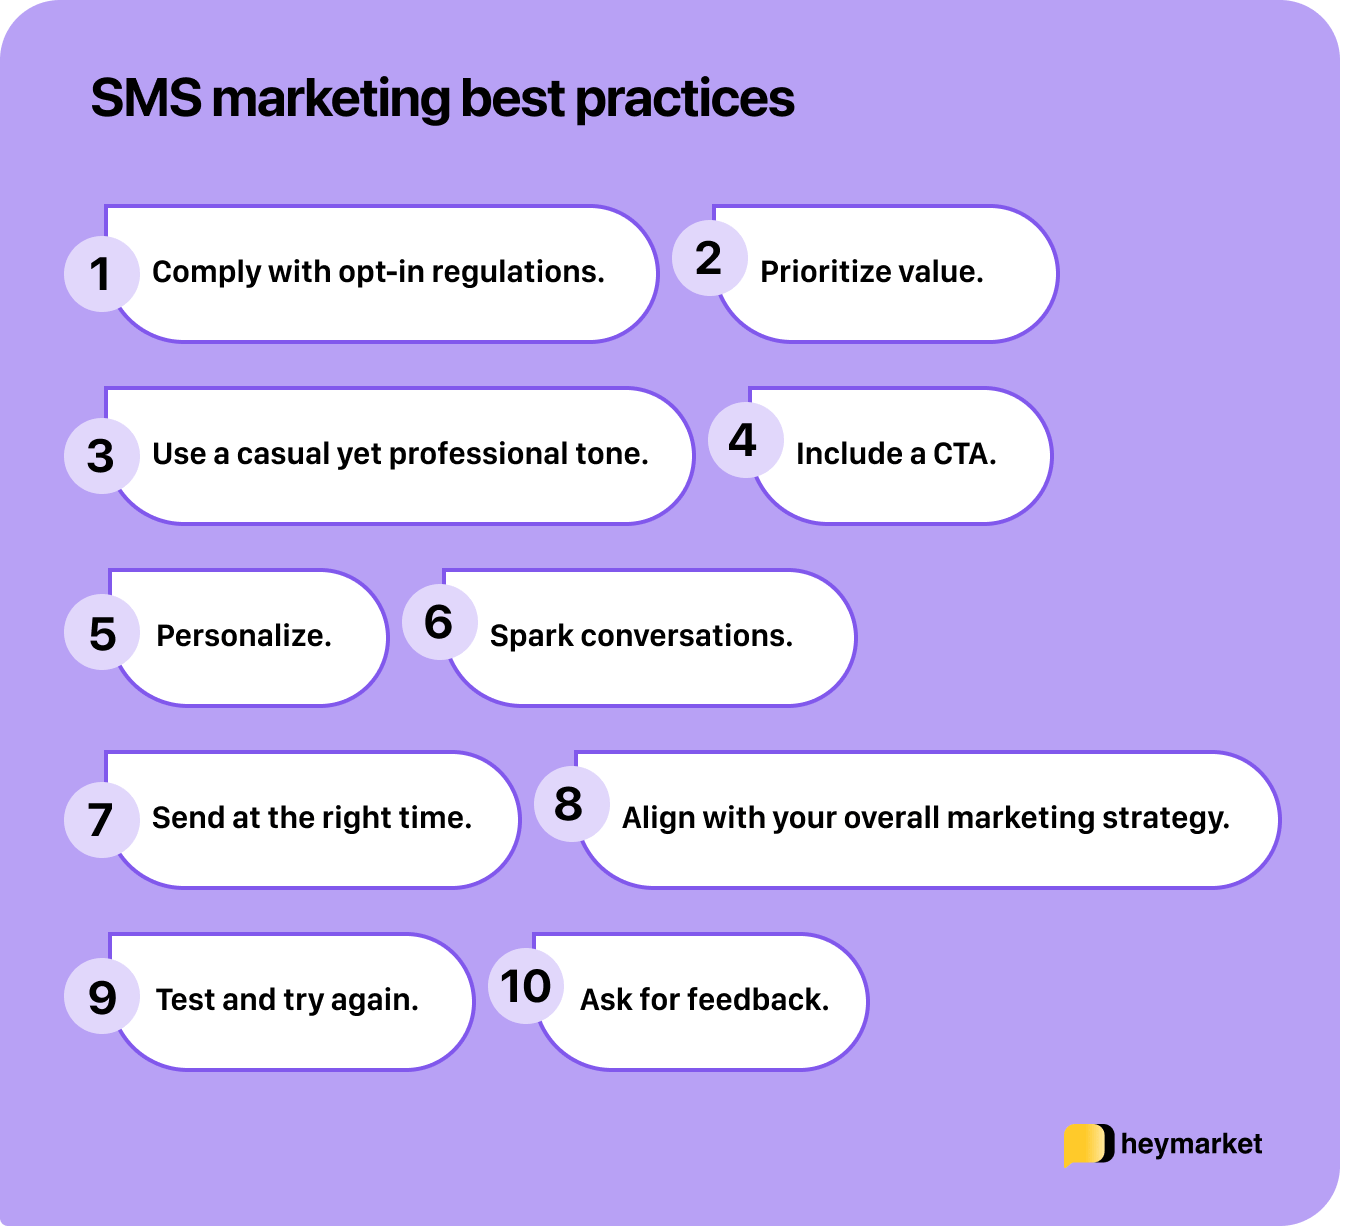 Illustration of 10 SMS marketing best practices